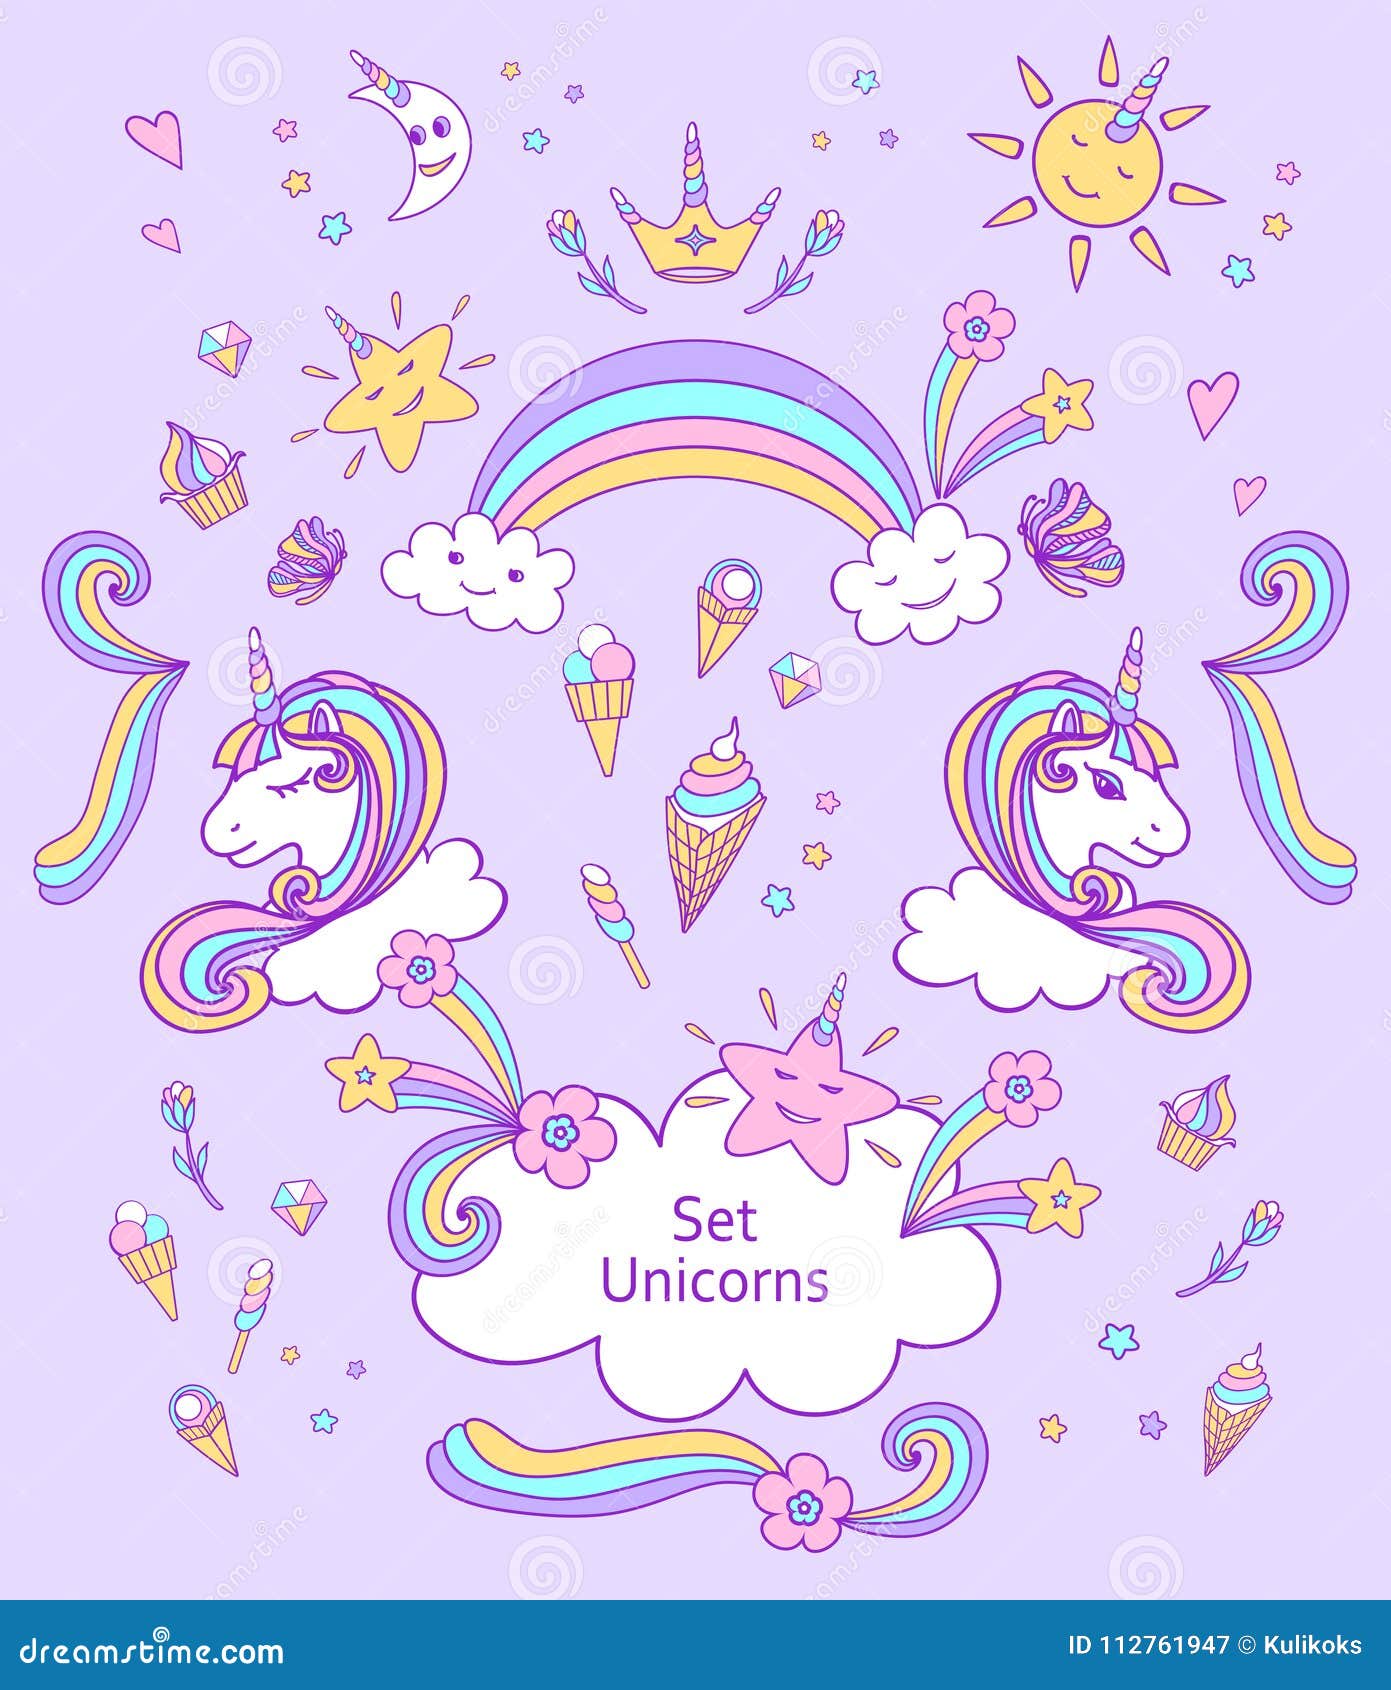 set unicorns and cute s in doodle cartoon style